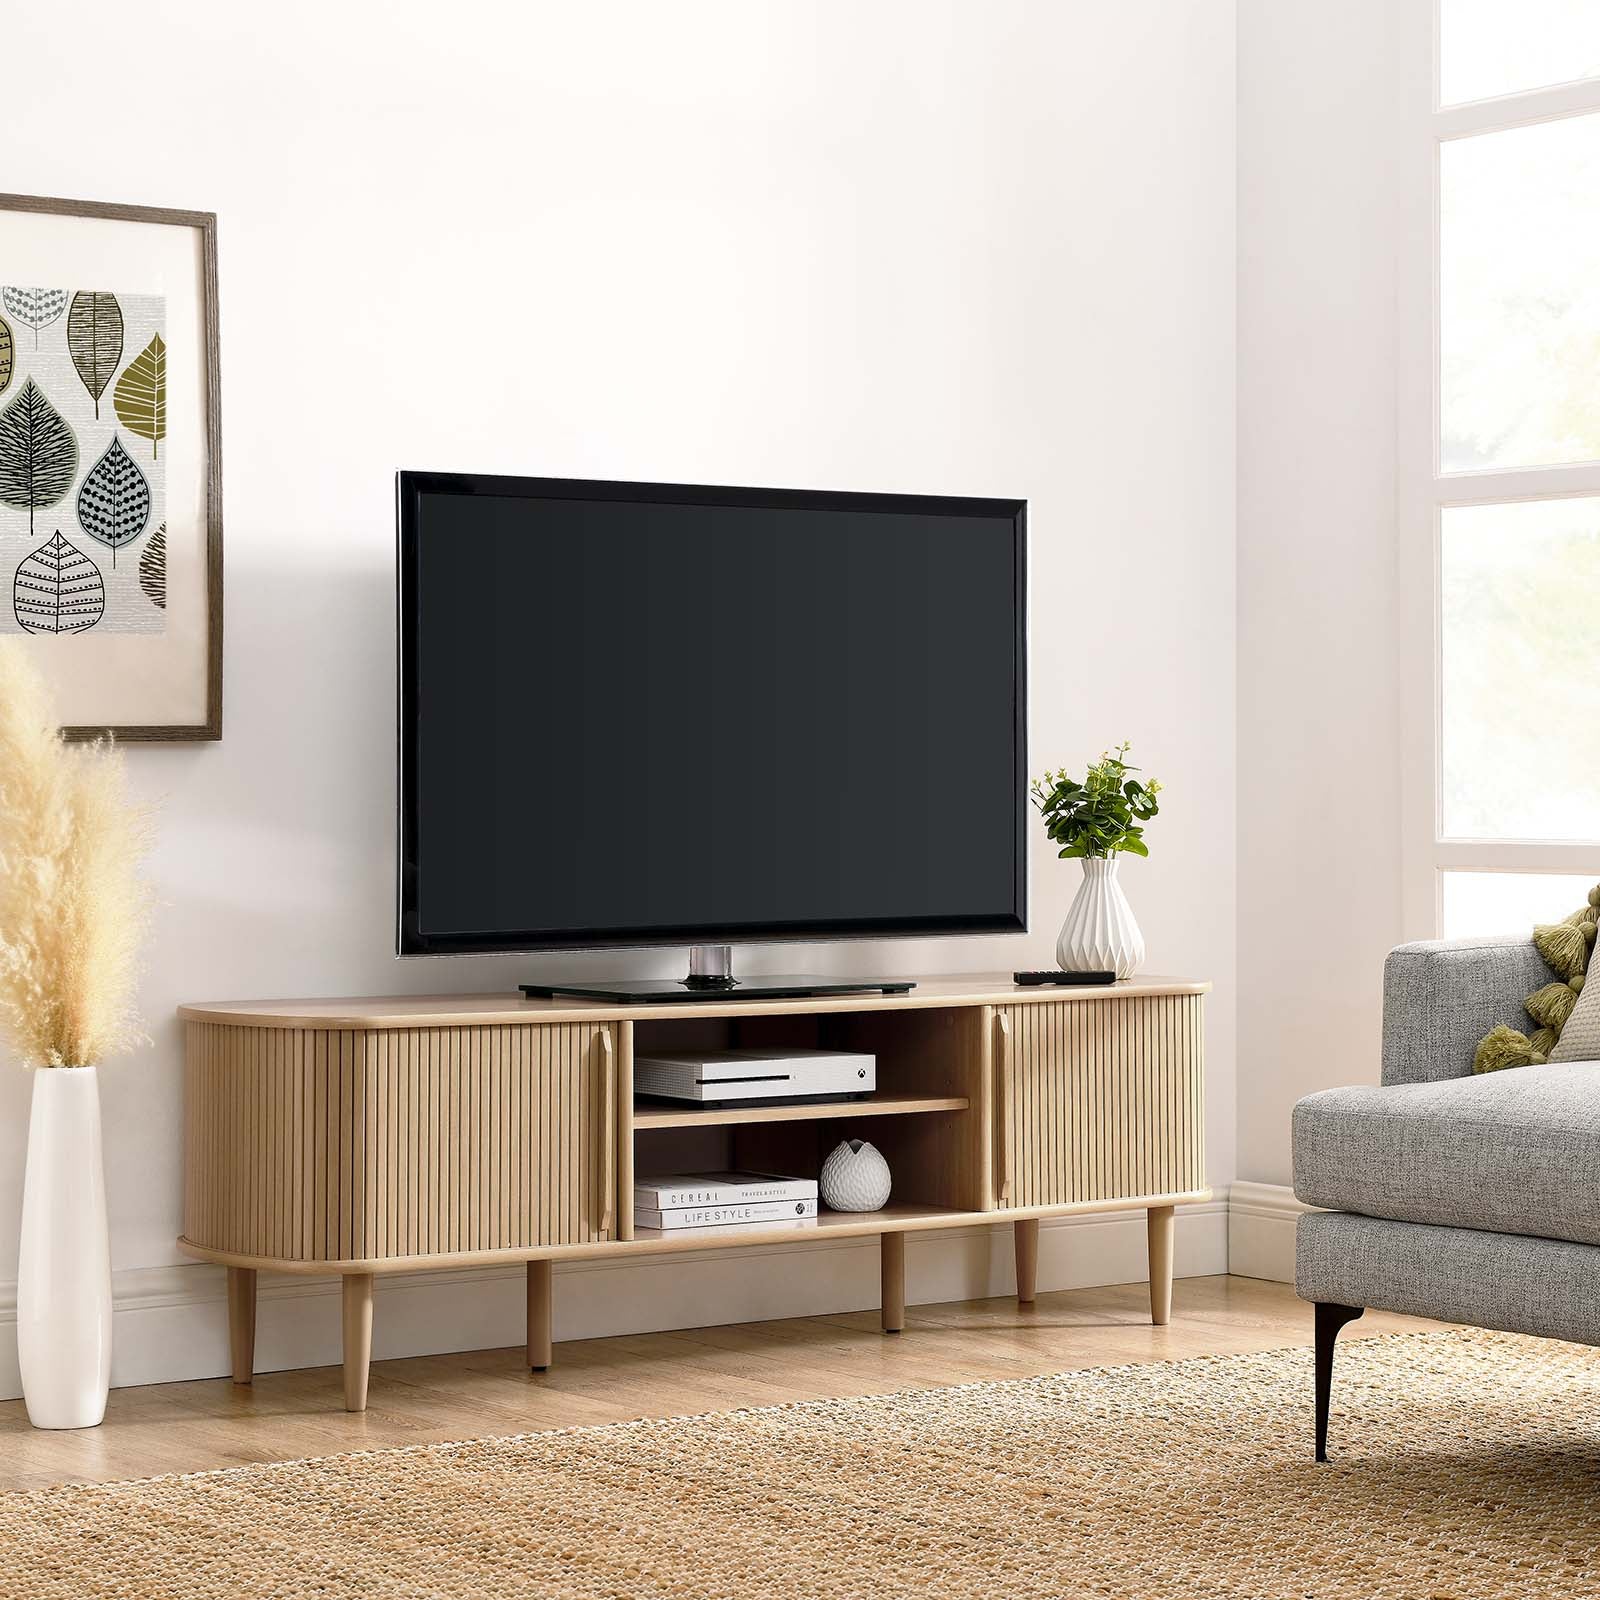 Contour 63" Wood TV Stand